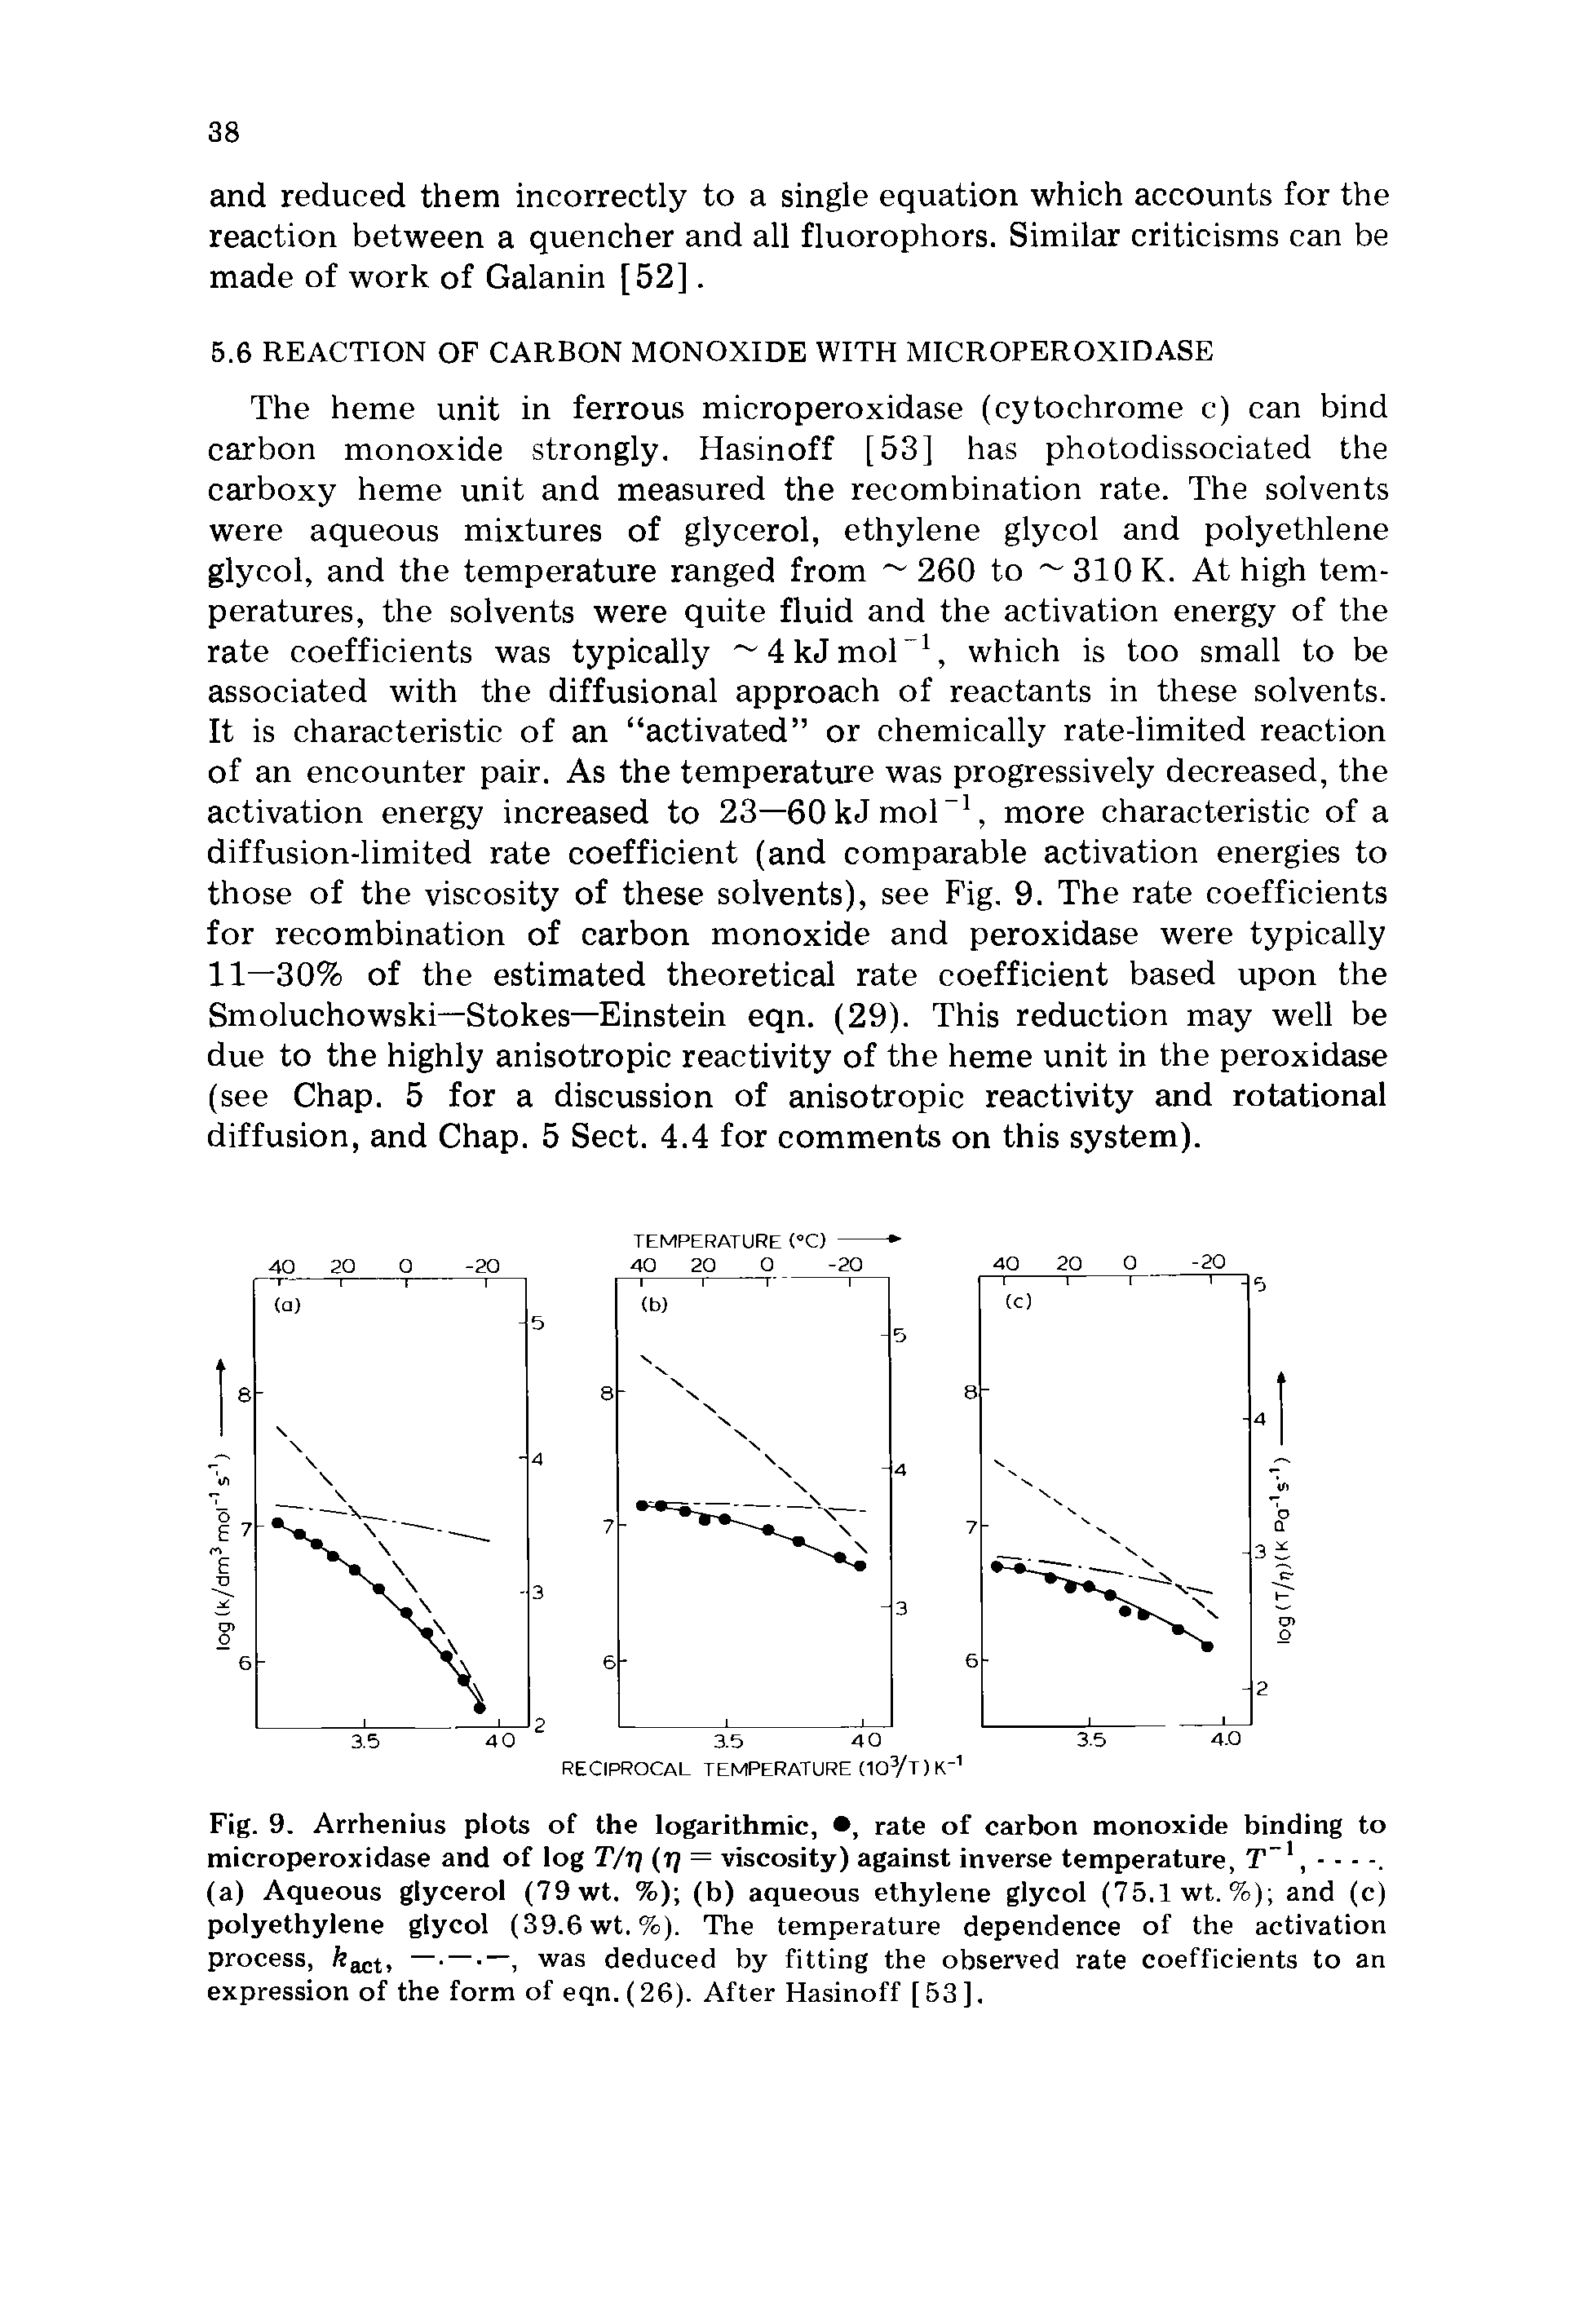 Fig. 9. Arrhenius plots of the logarithmic, , rate of carbon monoxide binding to microperoxidase and of log T/T) (tj = viscosity) against inverse temperature, T 1,...